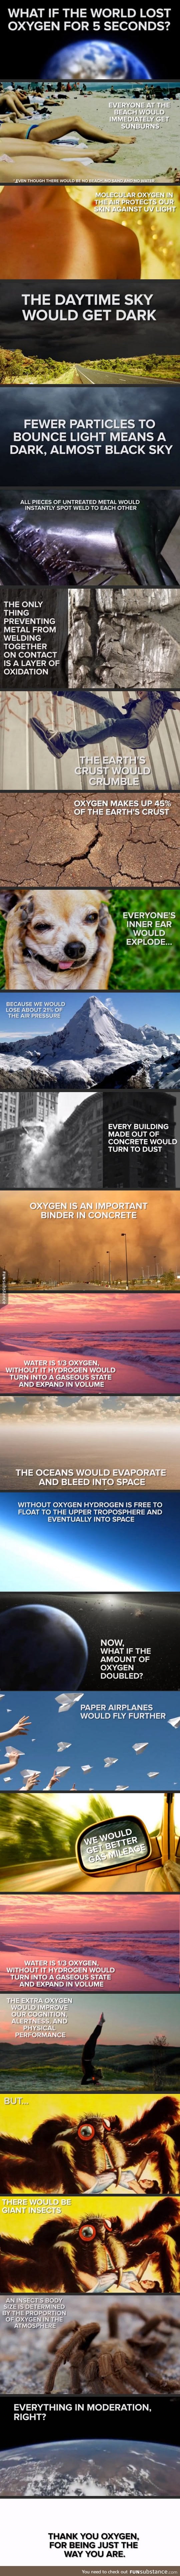 If the world lost oxygen for 5 seconds